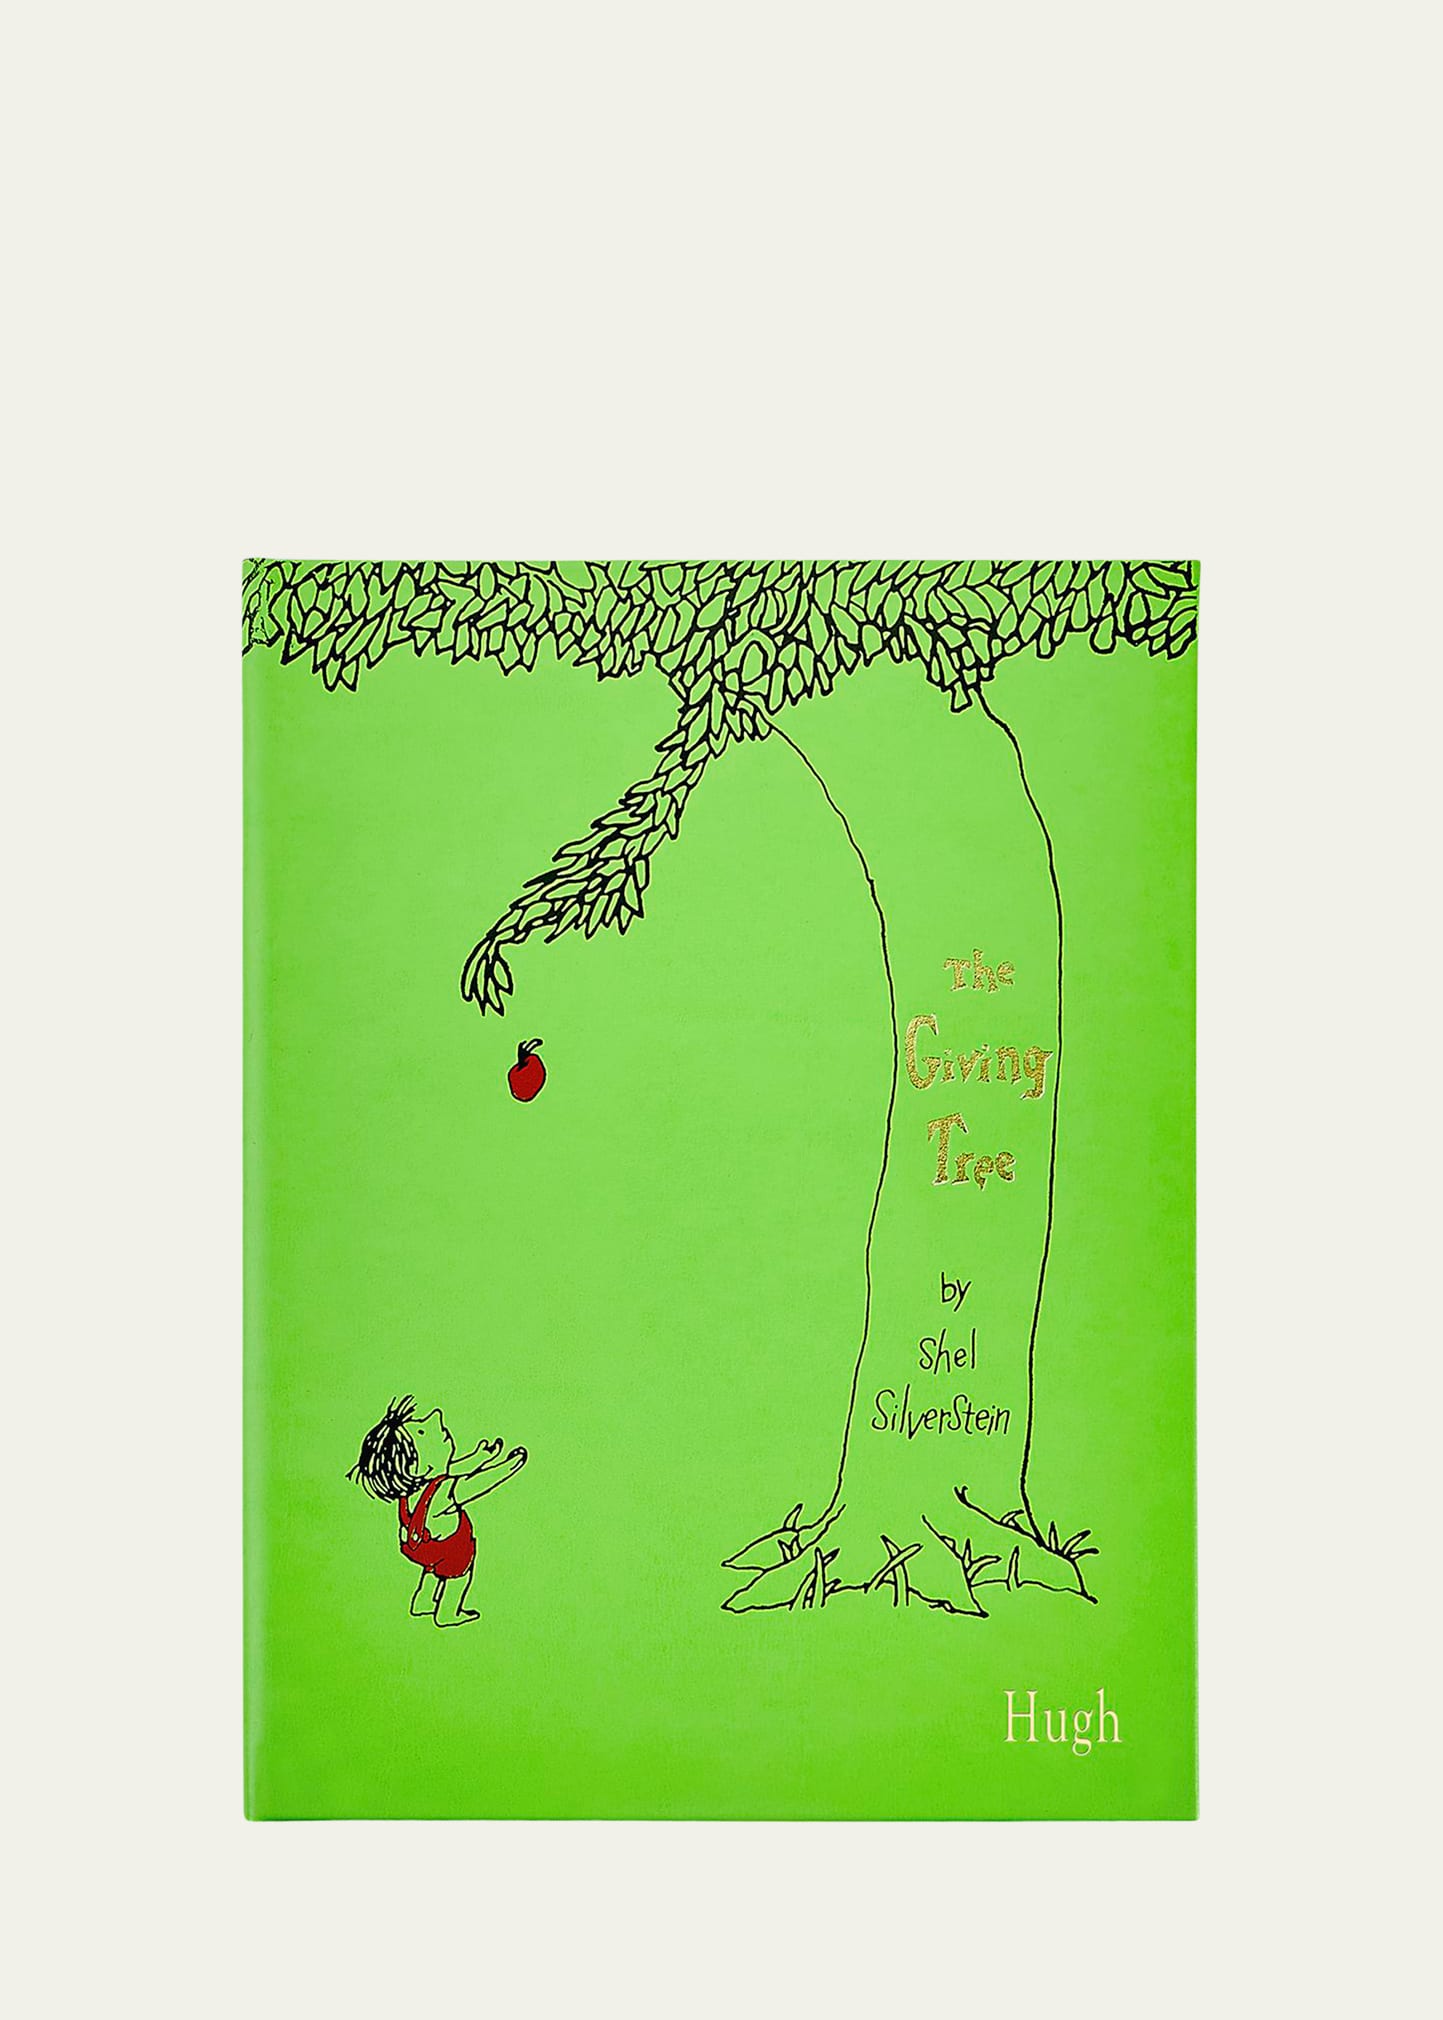 Personalized Leather Bound "The Giving Tree" Children's Book